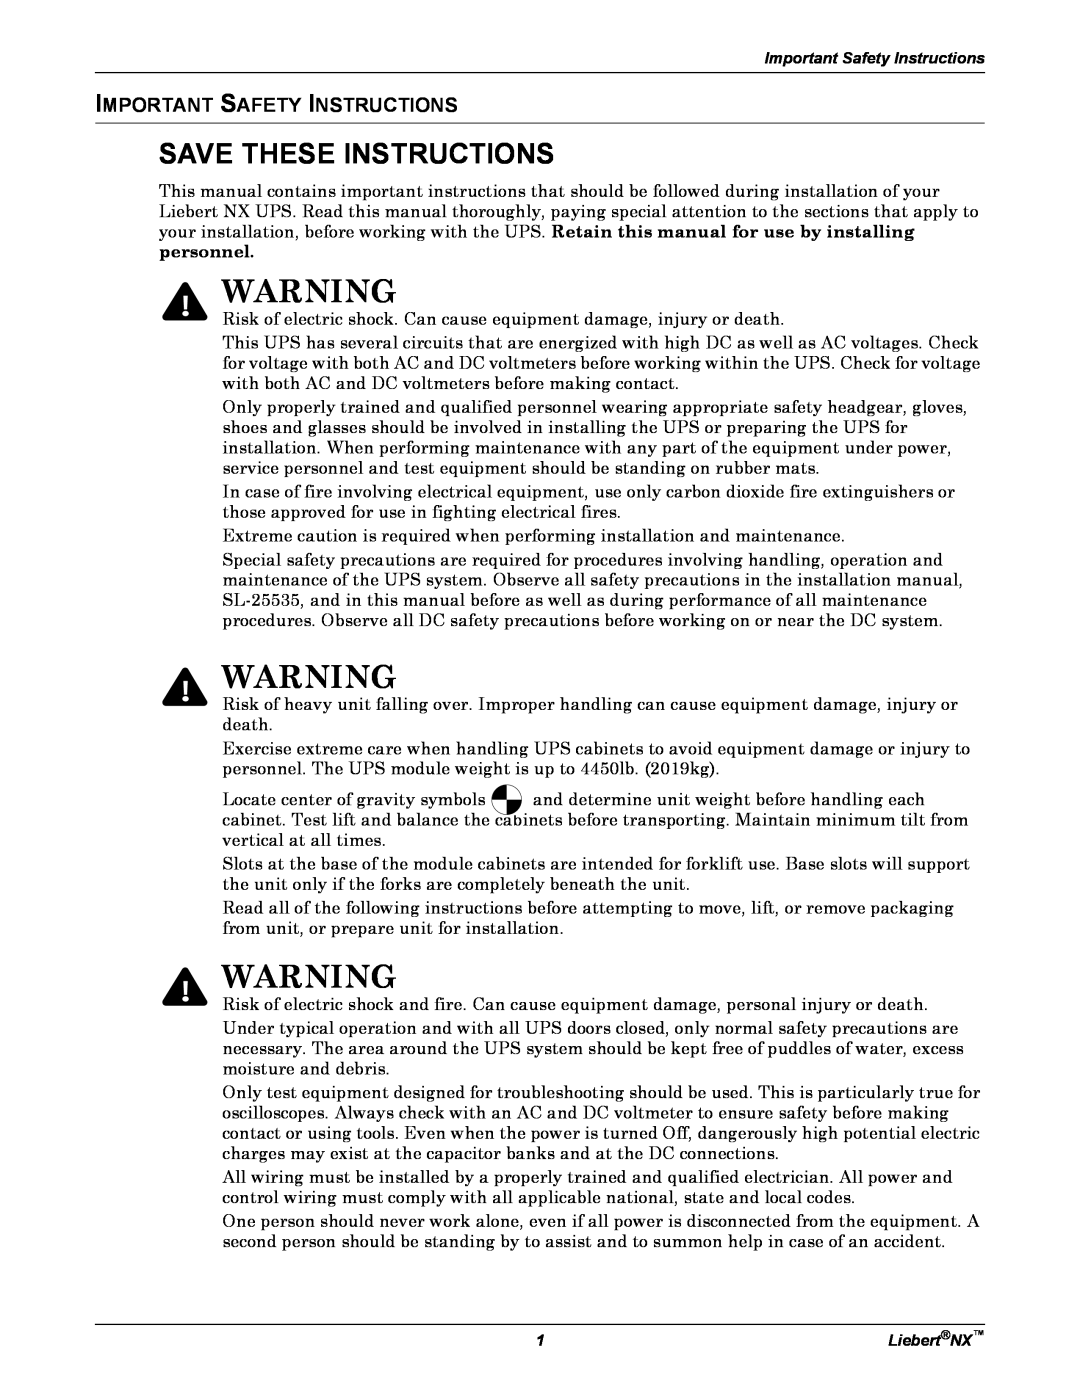 Emerson NX manual Important Safety Instructions, Save These Instructions 